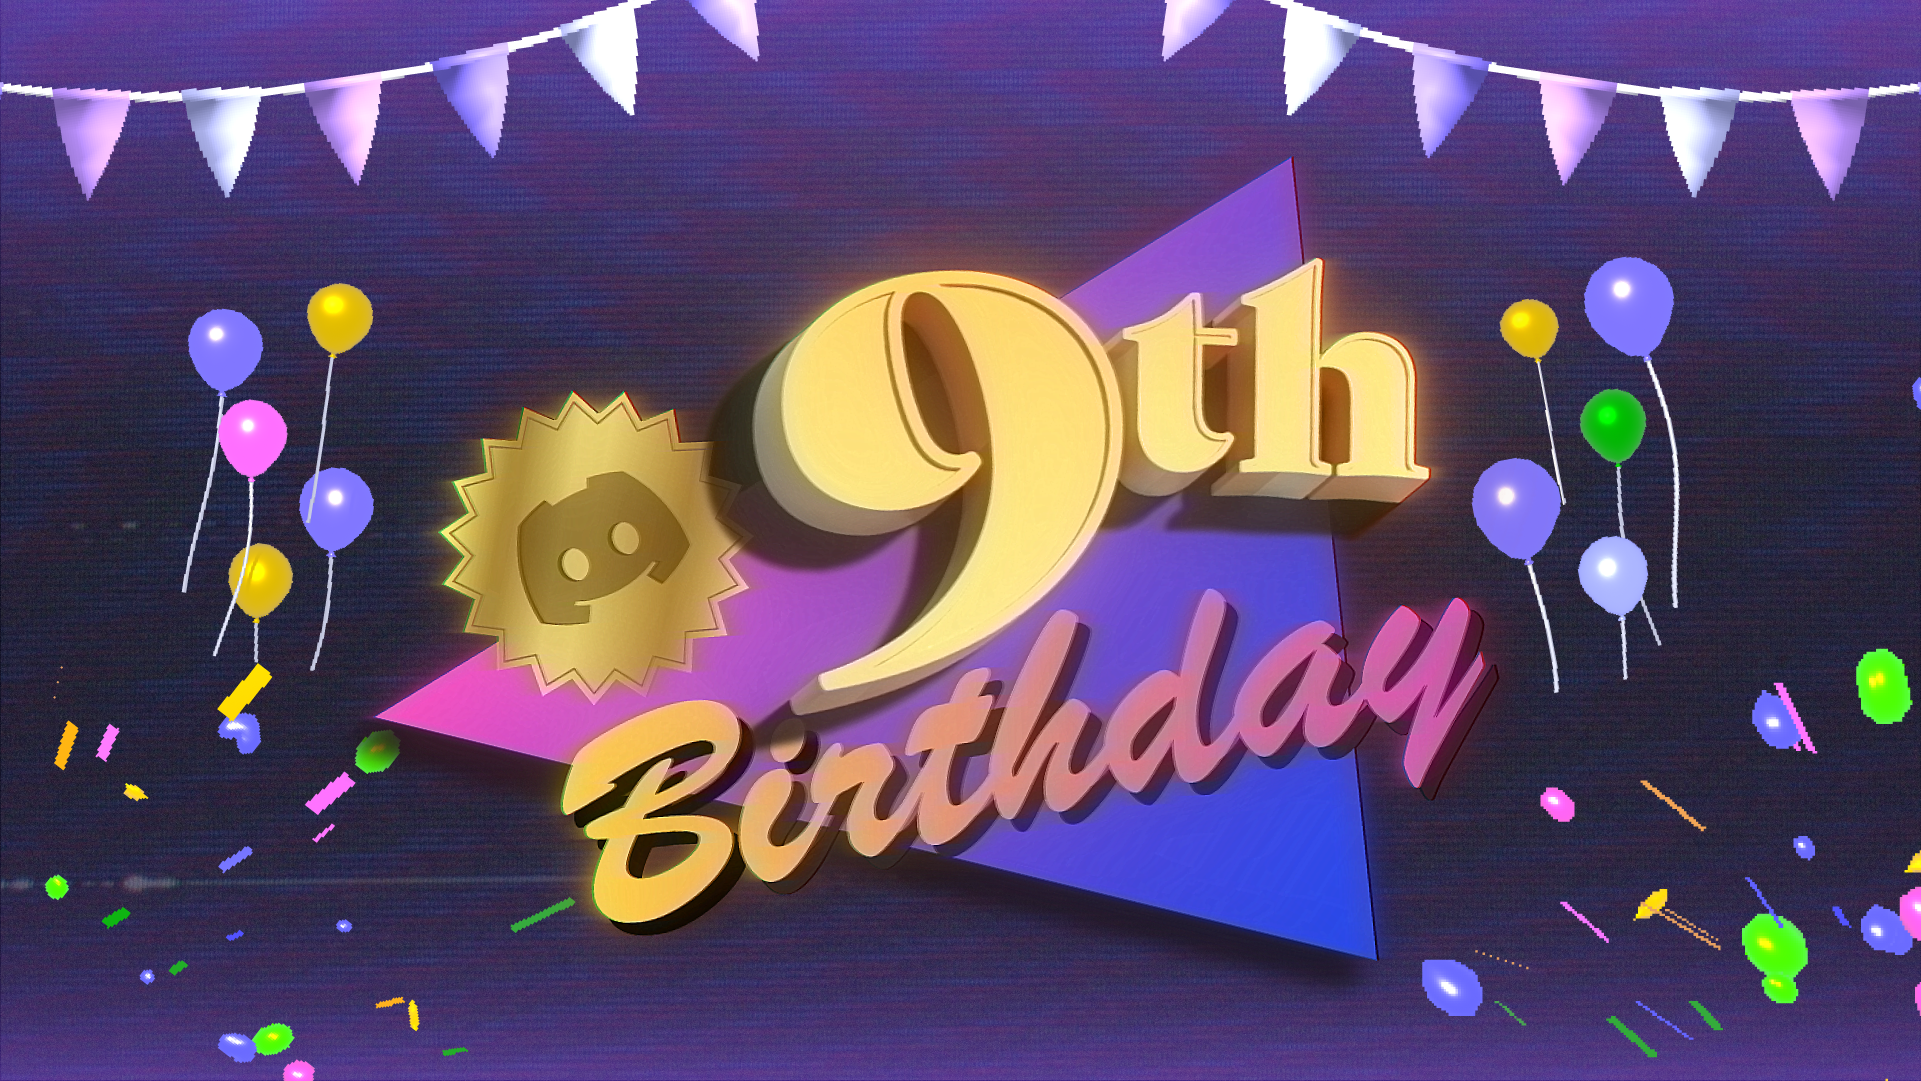 Discord's Clyde logo in a gold sticker with "9th birthday" in decorative text, over party streamers, confetti, and balloons